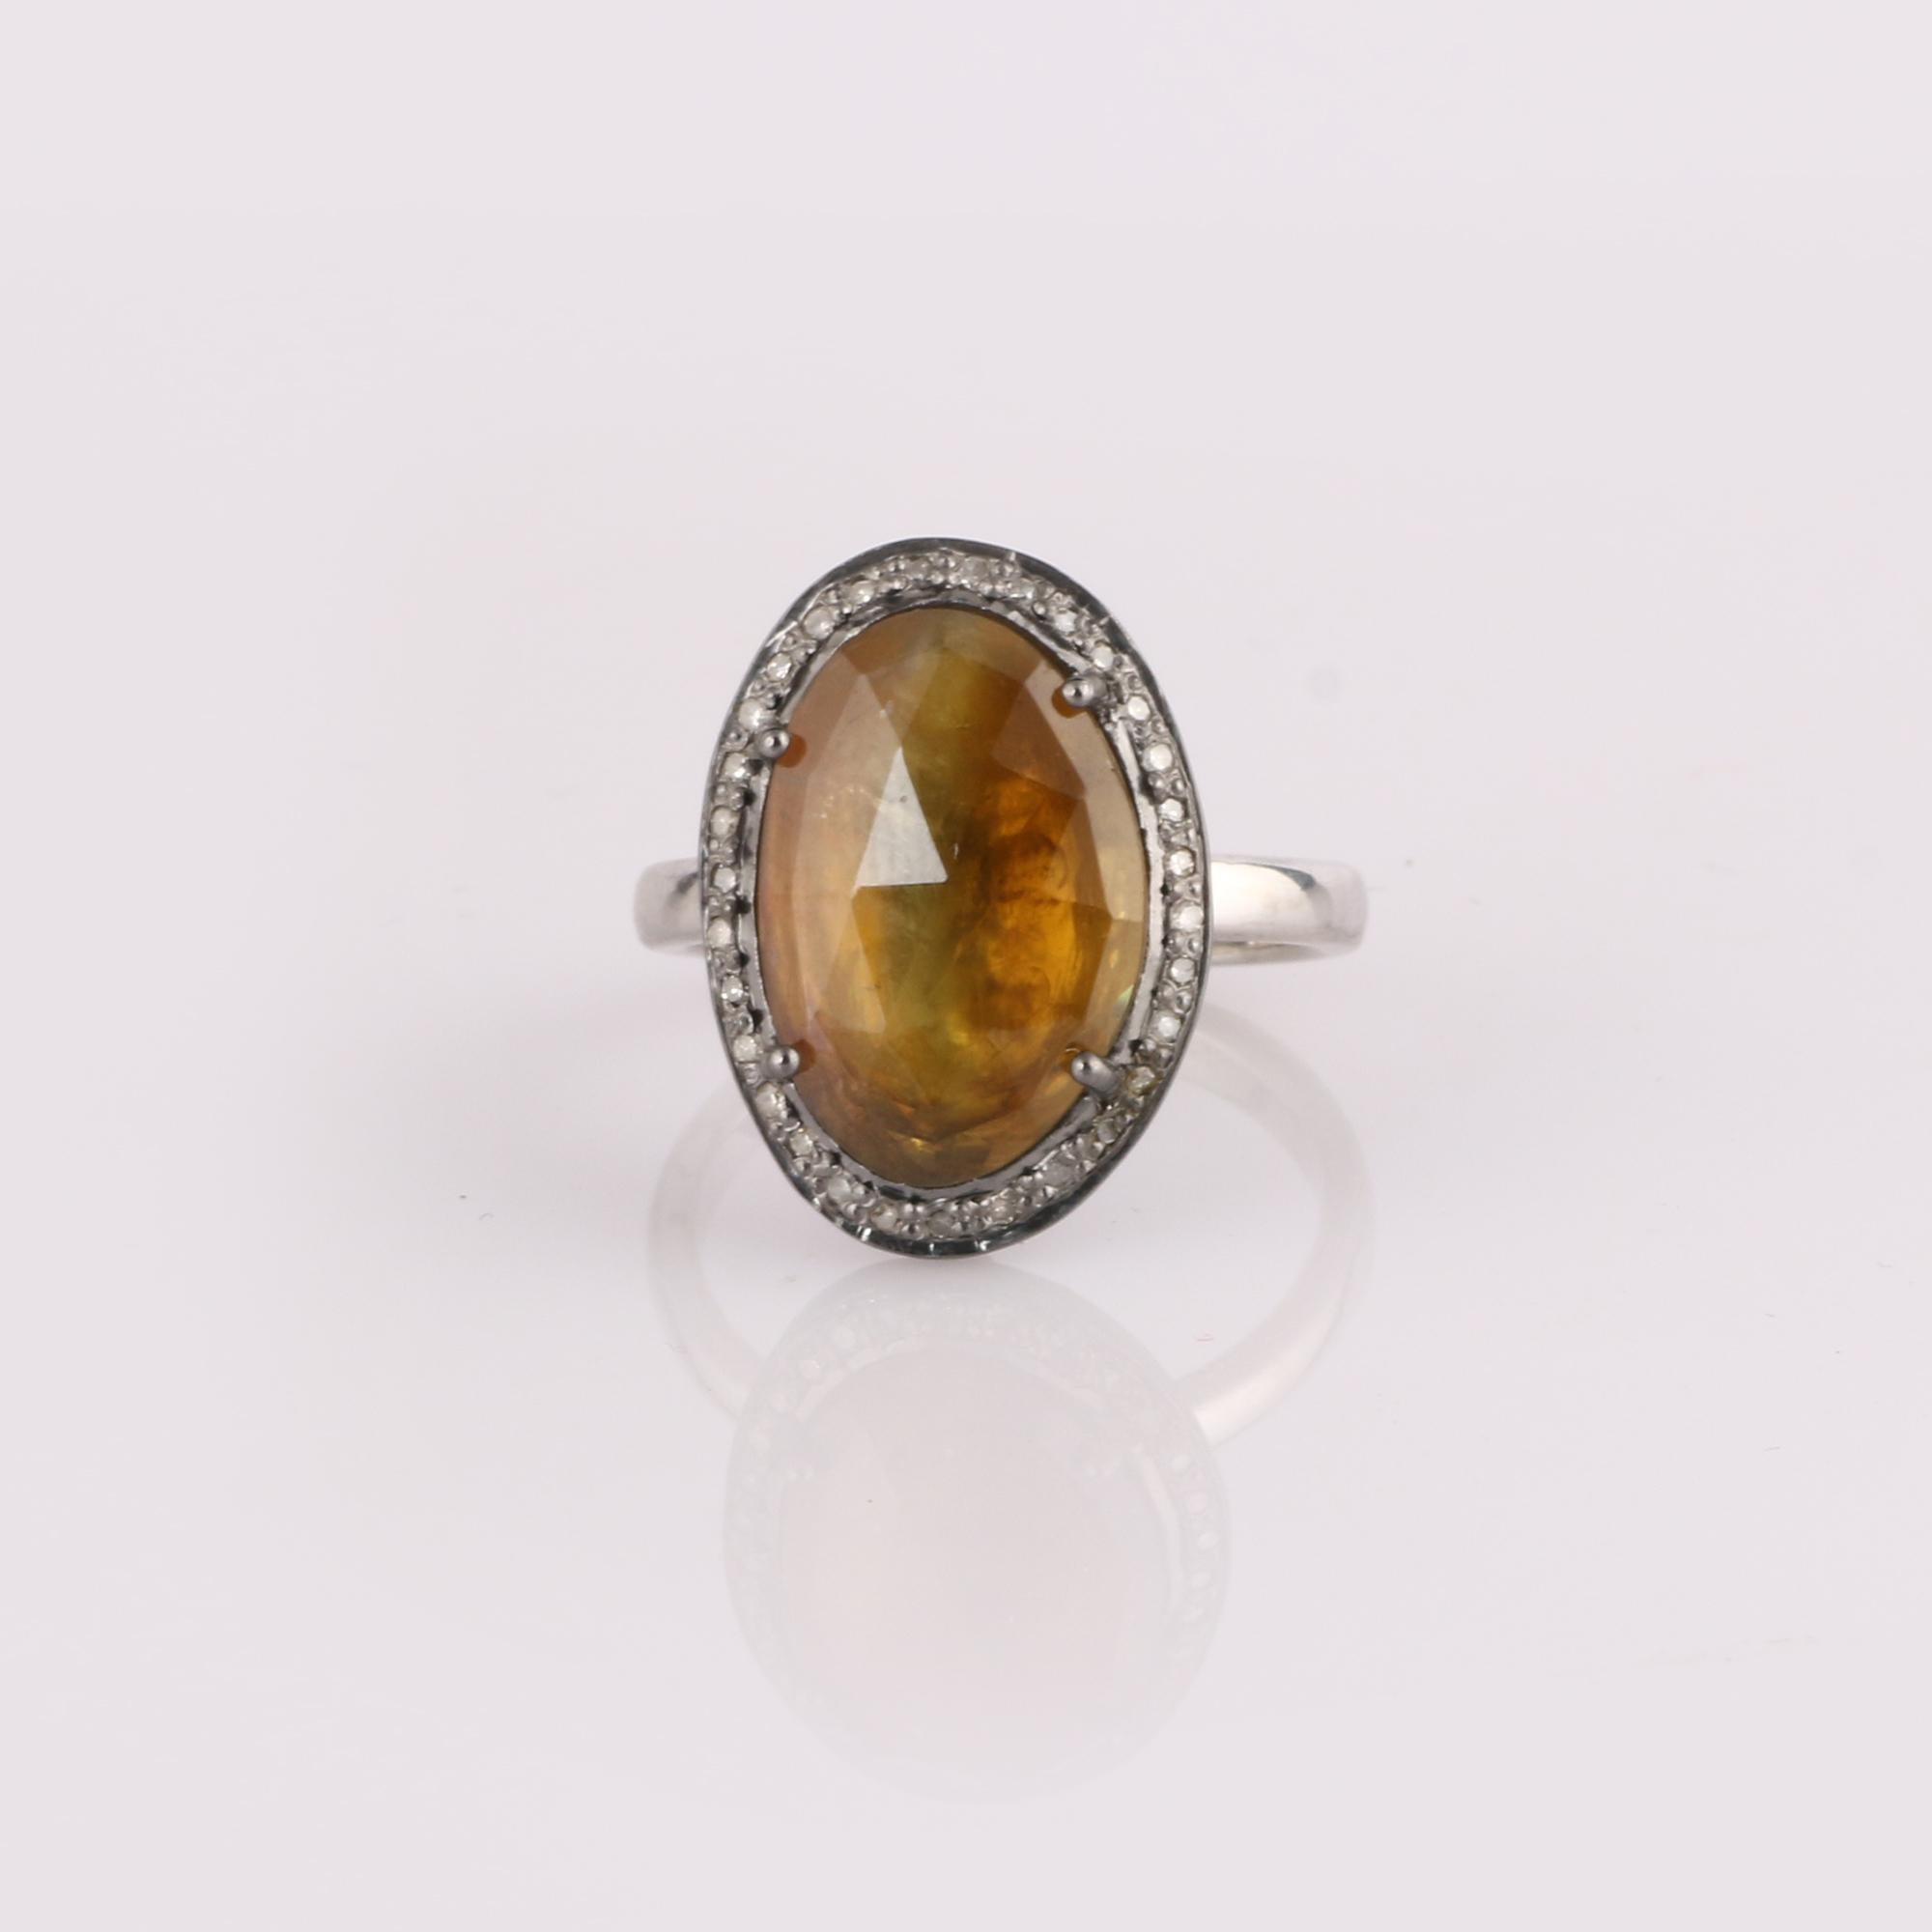 Item details:-

✦ SKU:- ESRG00218

✦ Material :- 925 Sterling Silver
✦ Gemstone Specification:-
✧ Diamond
✧ Amber

✦ Approx. Diamond Weight : 0.15
✦ Approx. Silver Weight : 4.4
✦ Approx. Gross Weight : 5.2

Ring Size (US): 7.5

You will Get the same